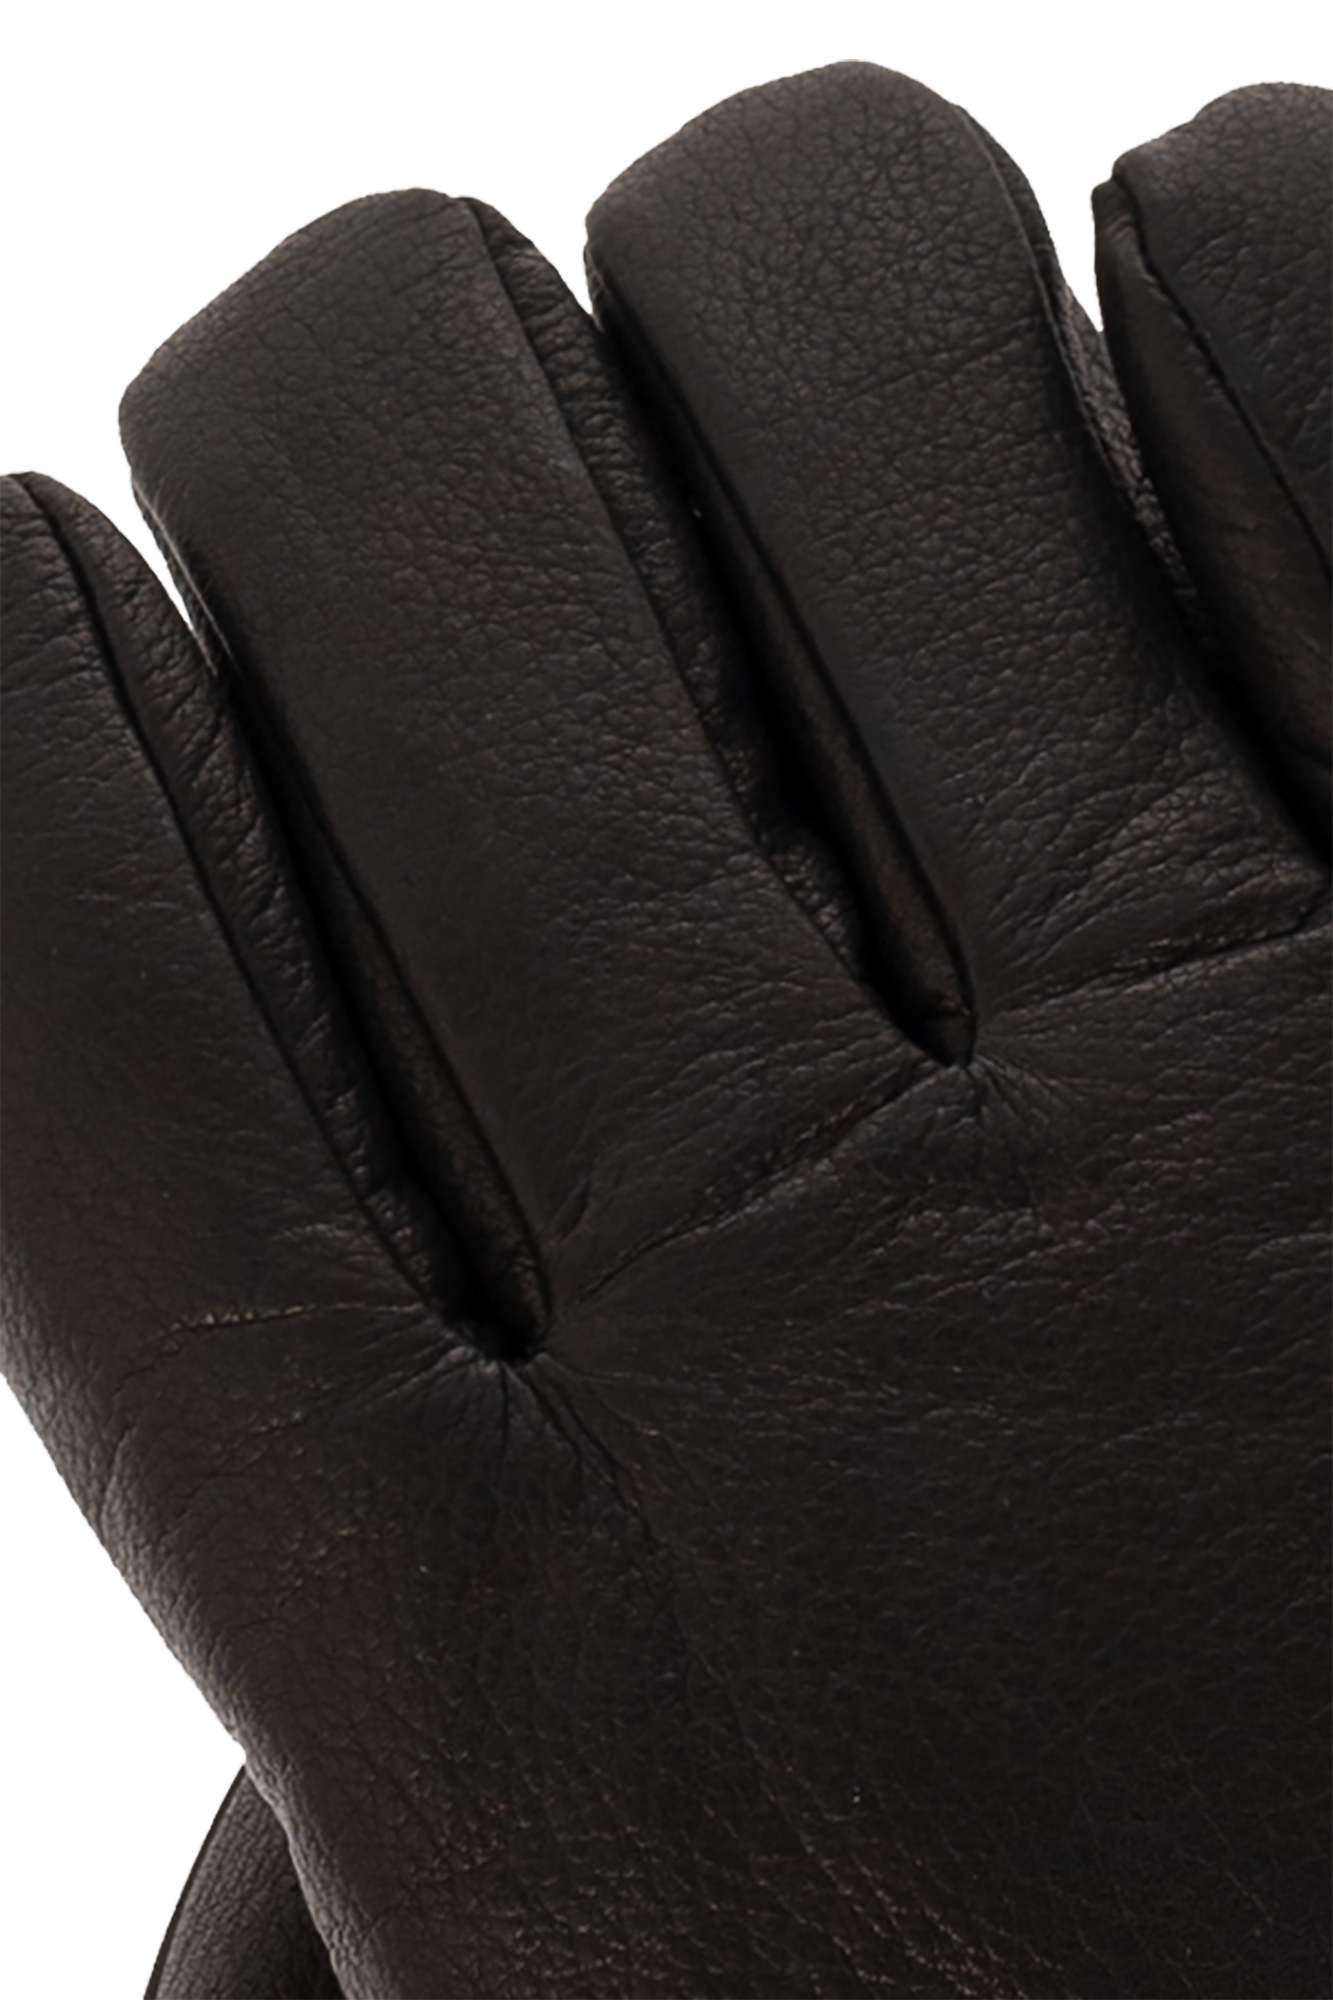 Carhartt WIP Leather gloves